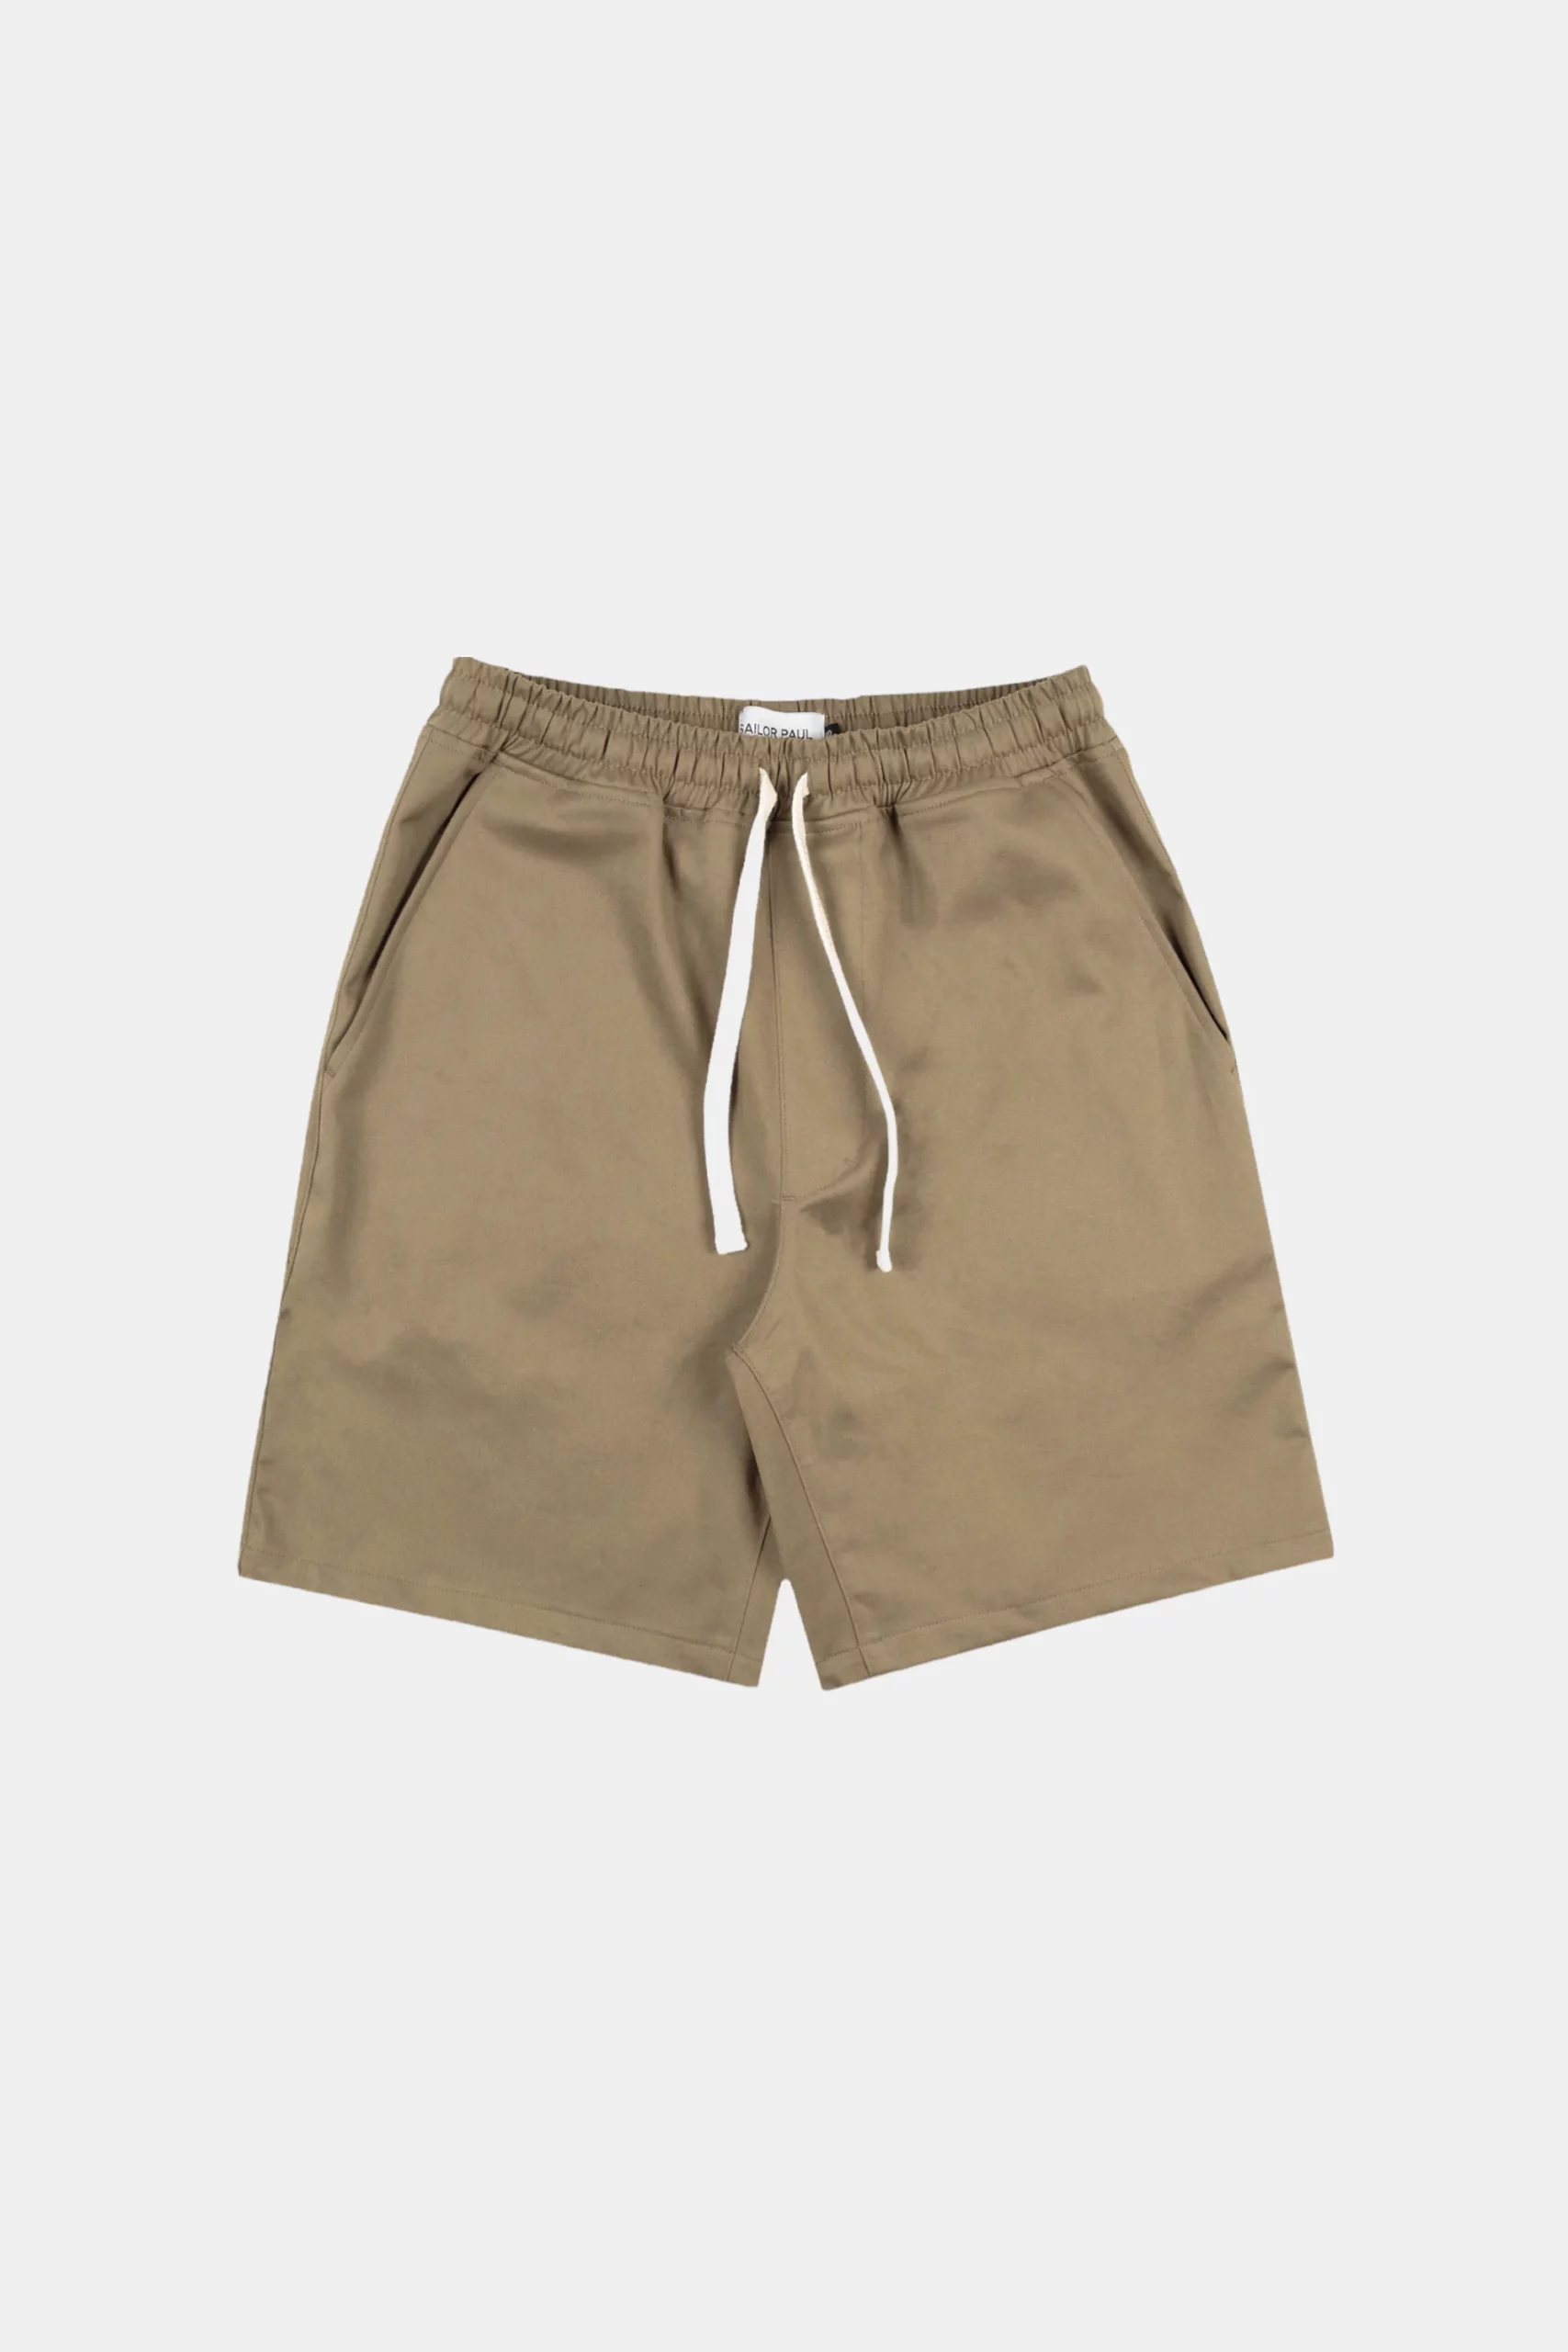 shorty sailorpaul relaed twill beige 2